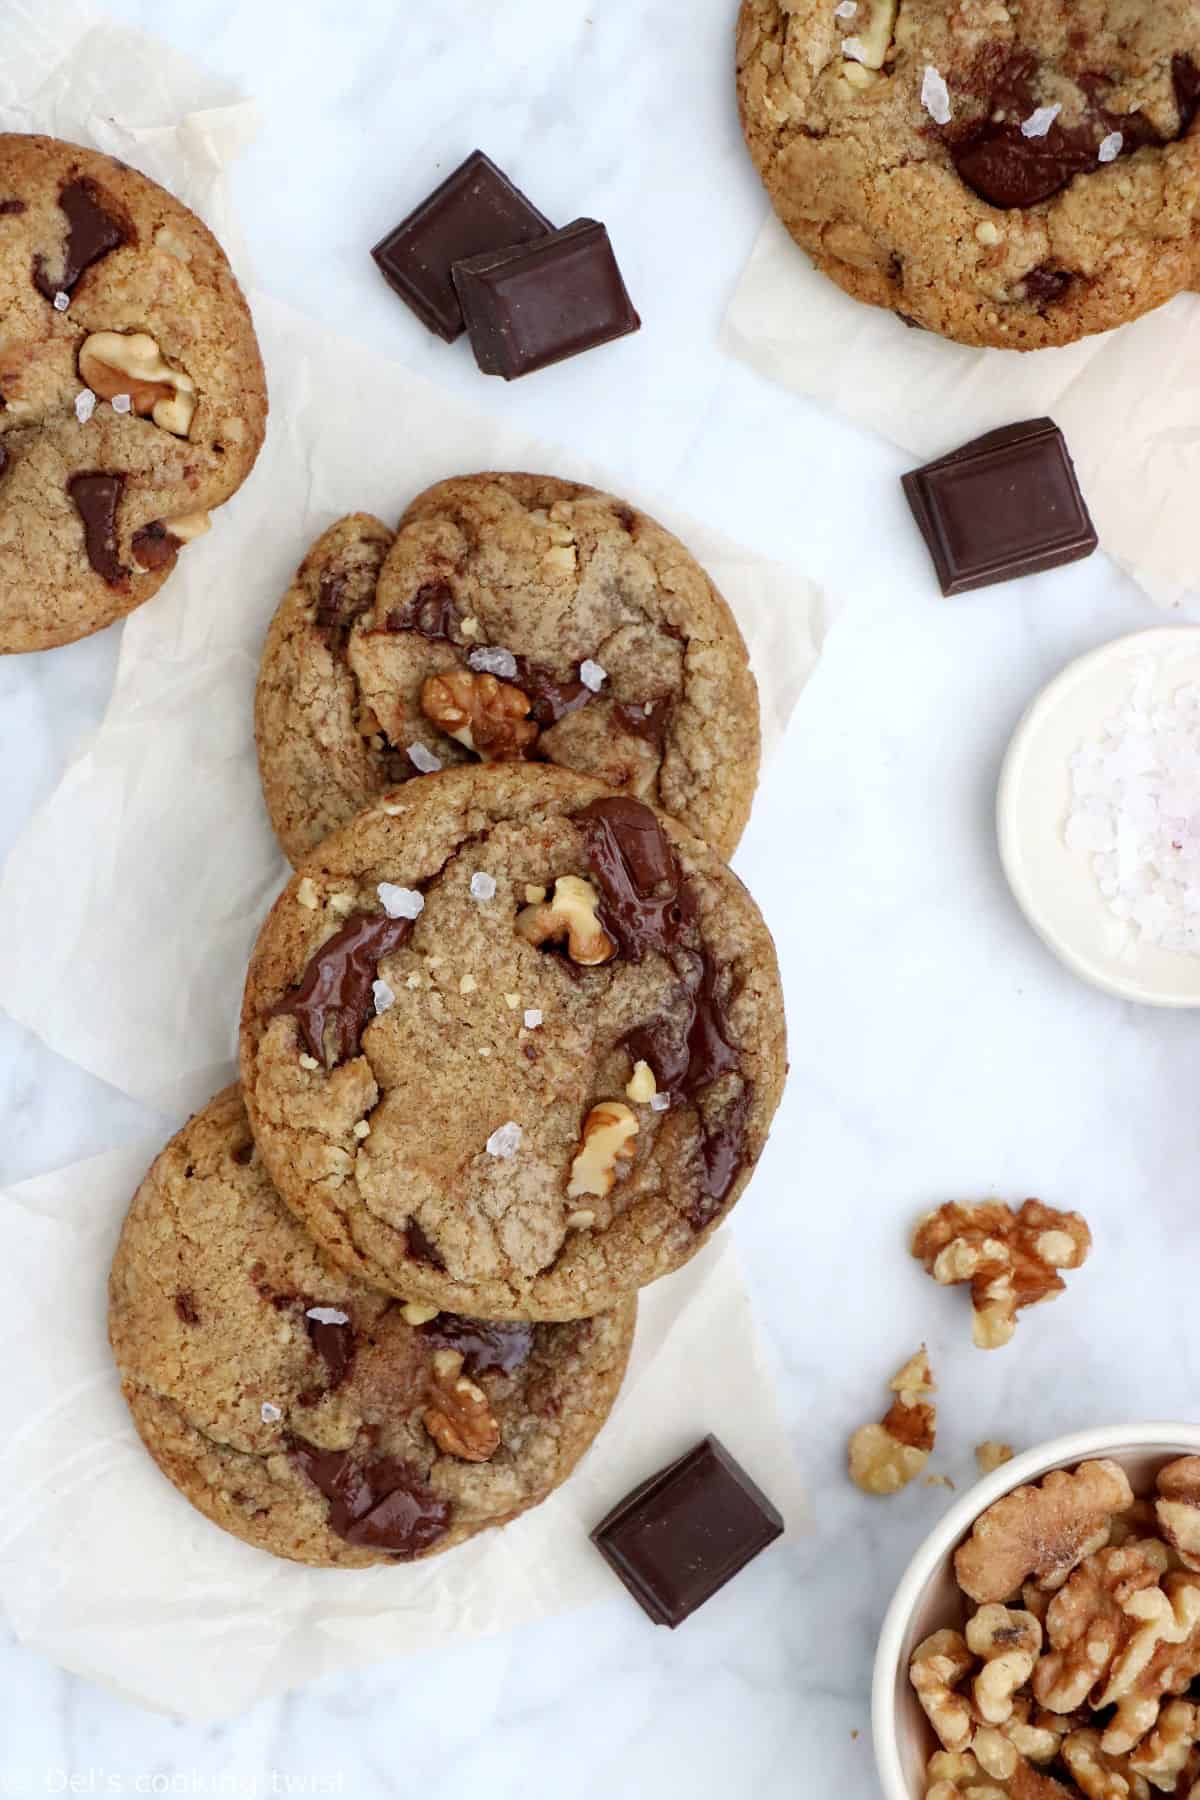 Both crunchy and chewy, these brown butter walnut chocolate chip cookies are truly out of this world. The brown butter also adds some delicious nutty flavors.